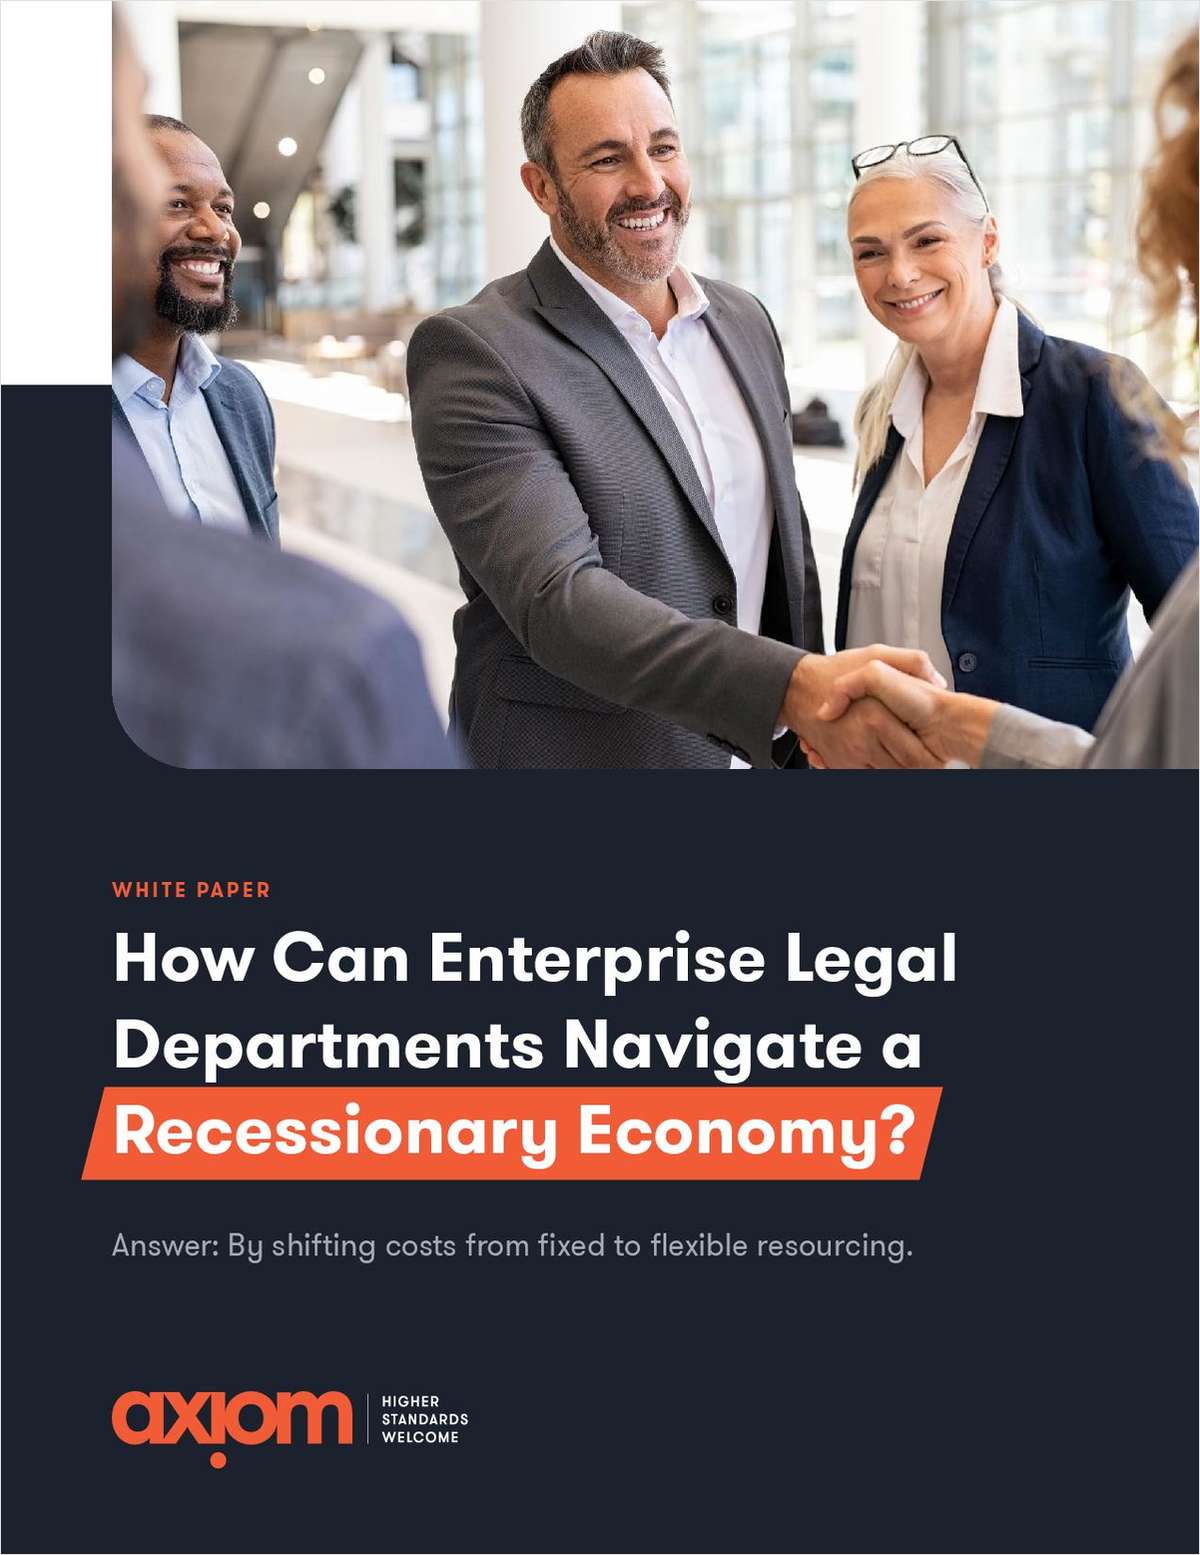 How Can Enterprise Legal Departments Navigate a Recessionary Economy?